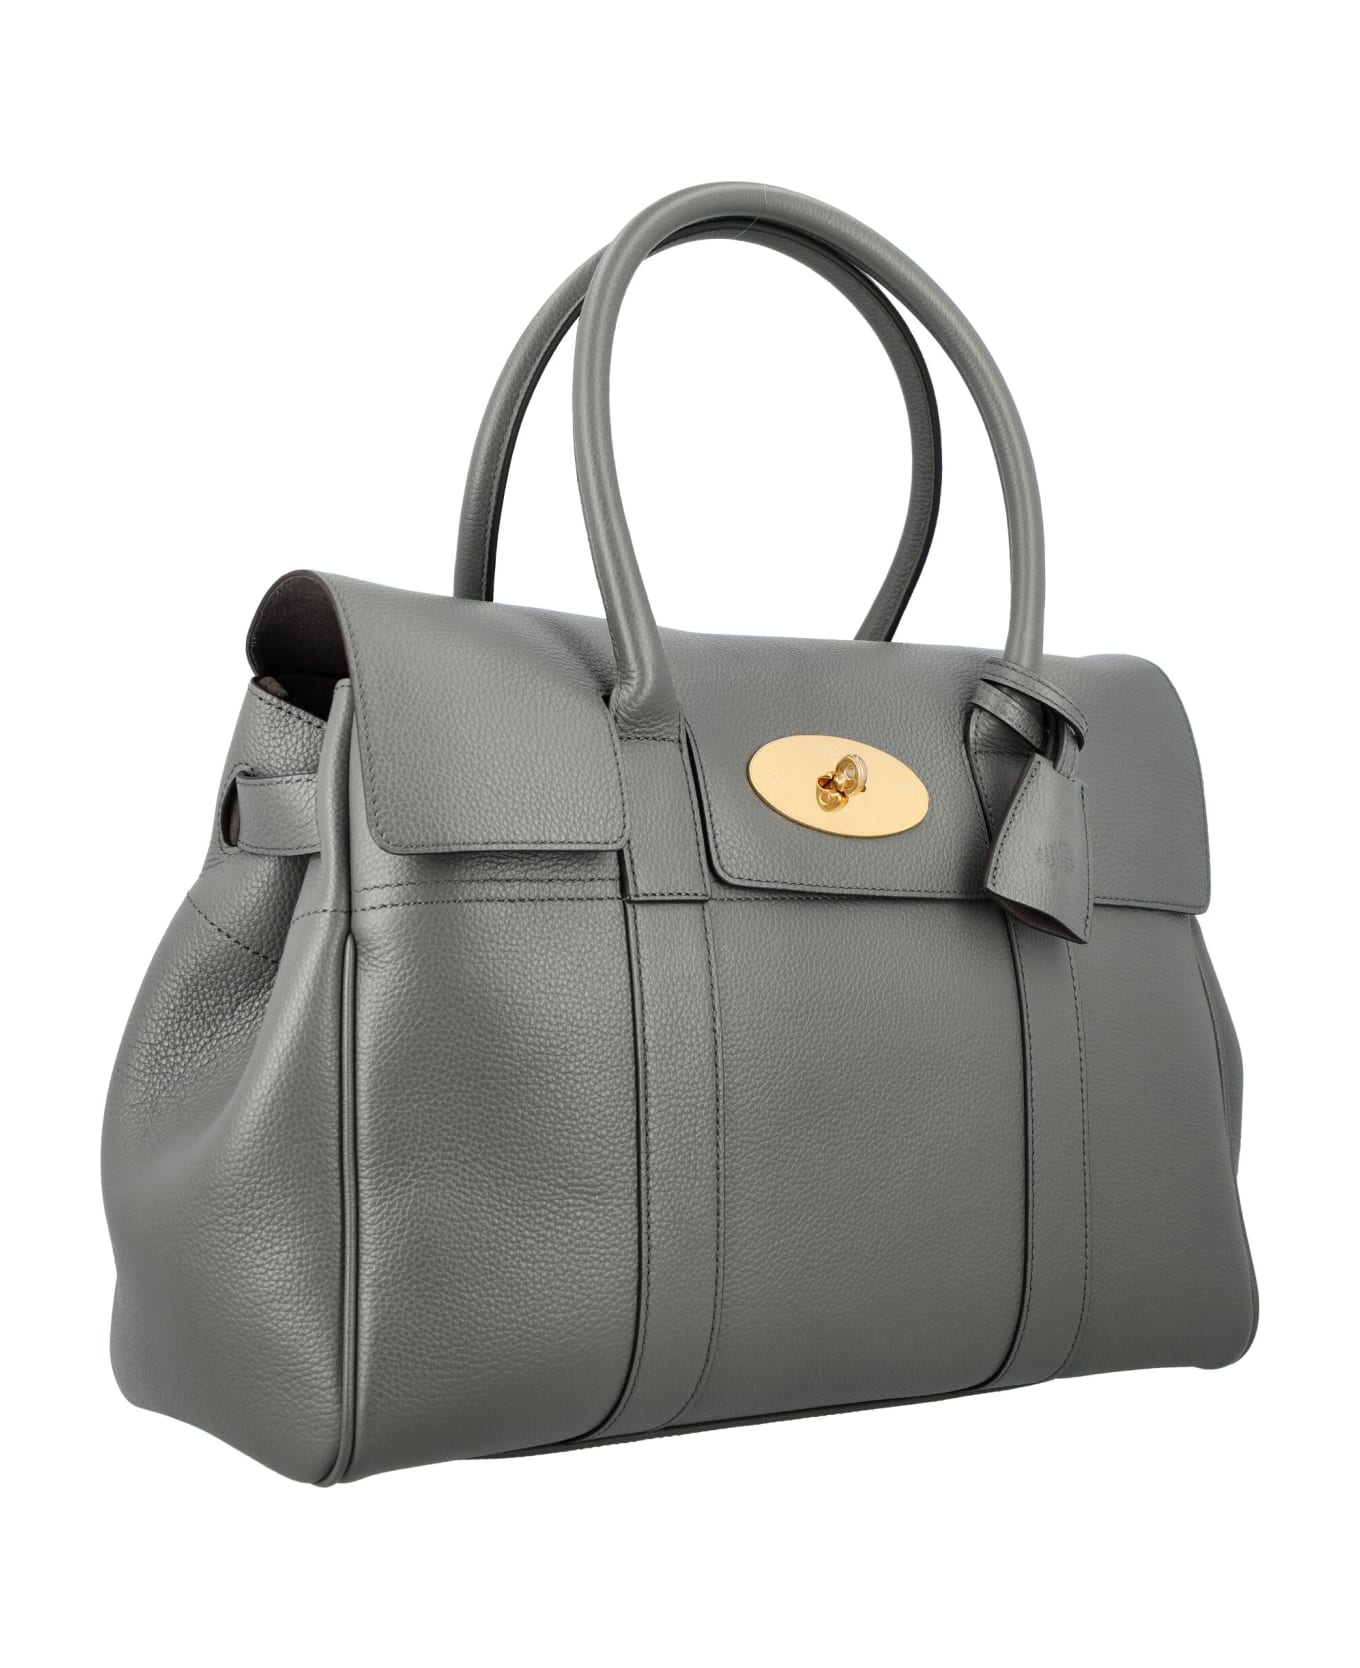 Mulberry Bayswater - CHARCOAL